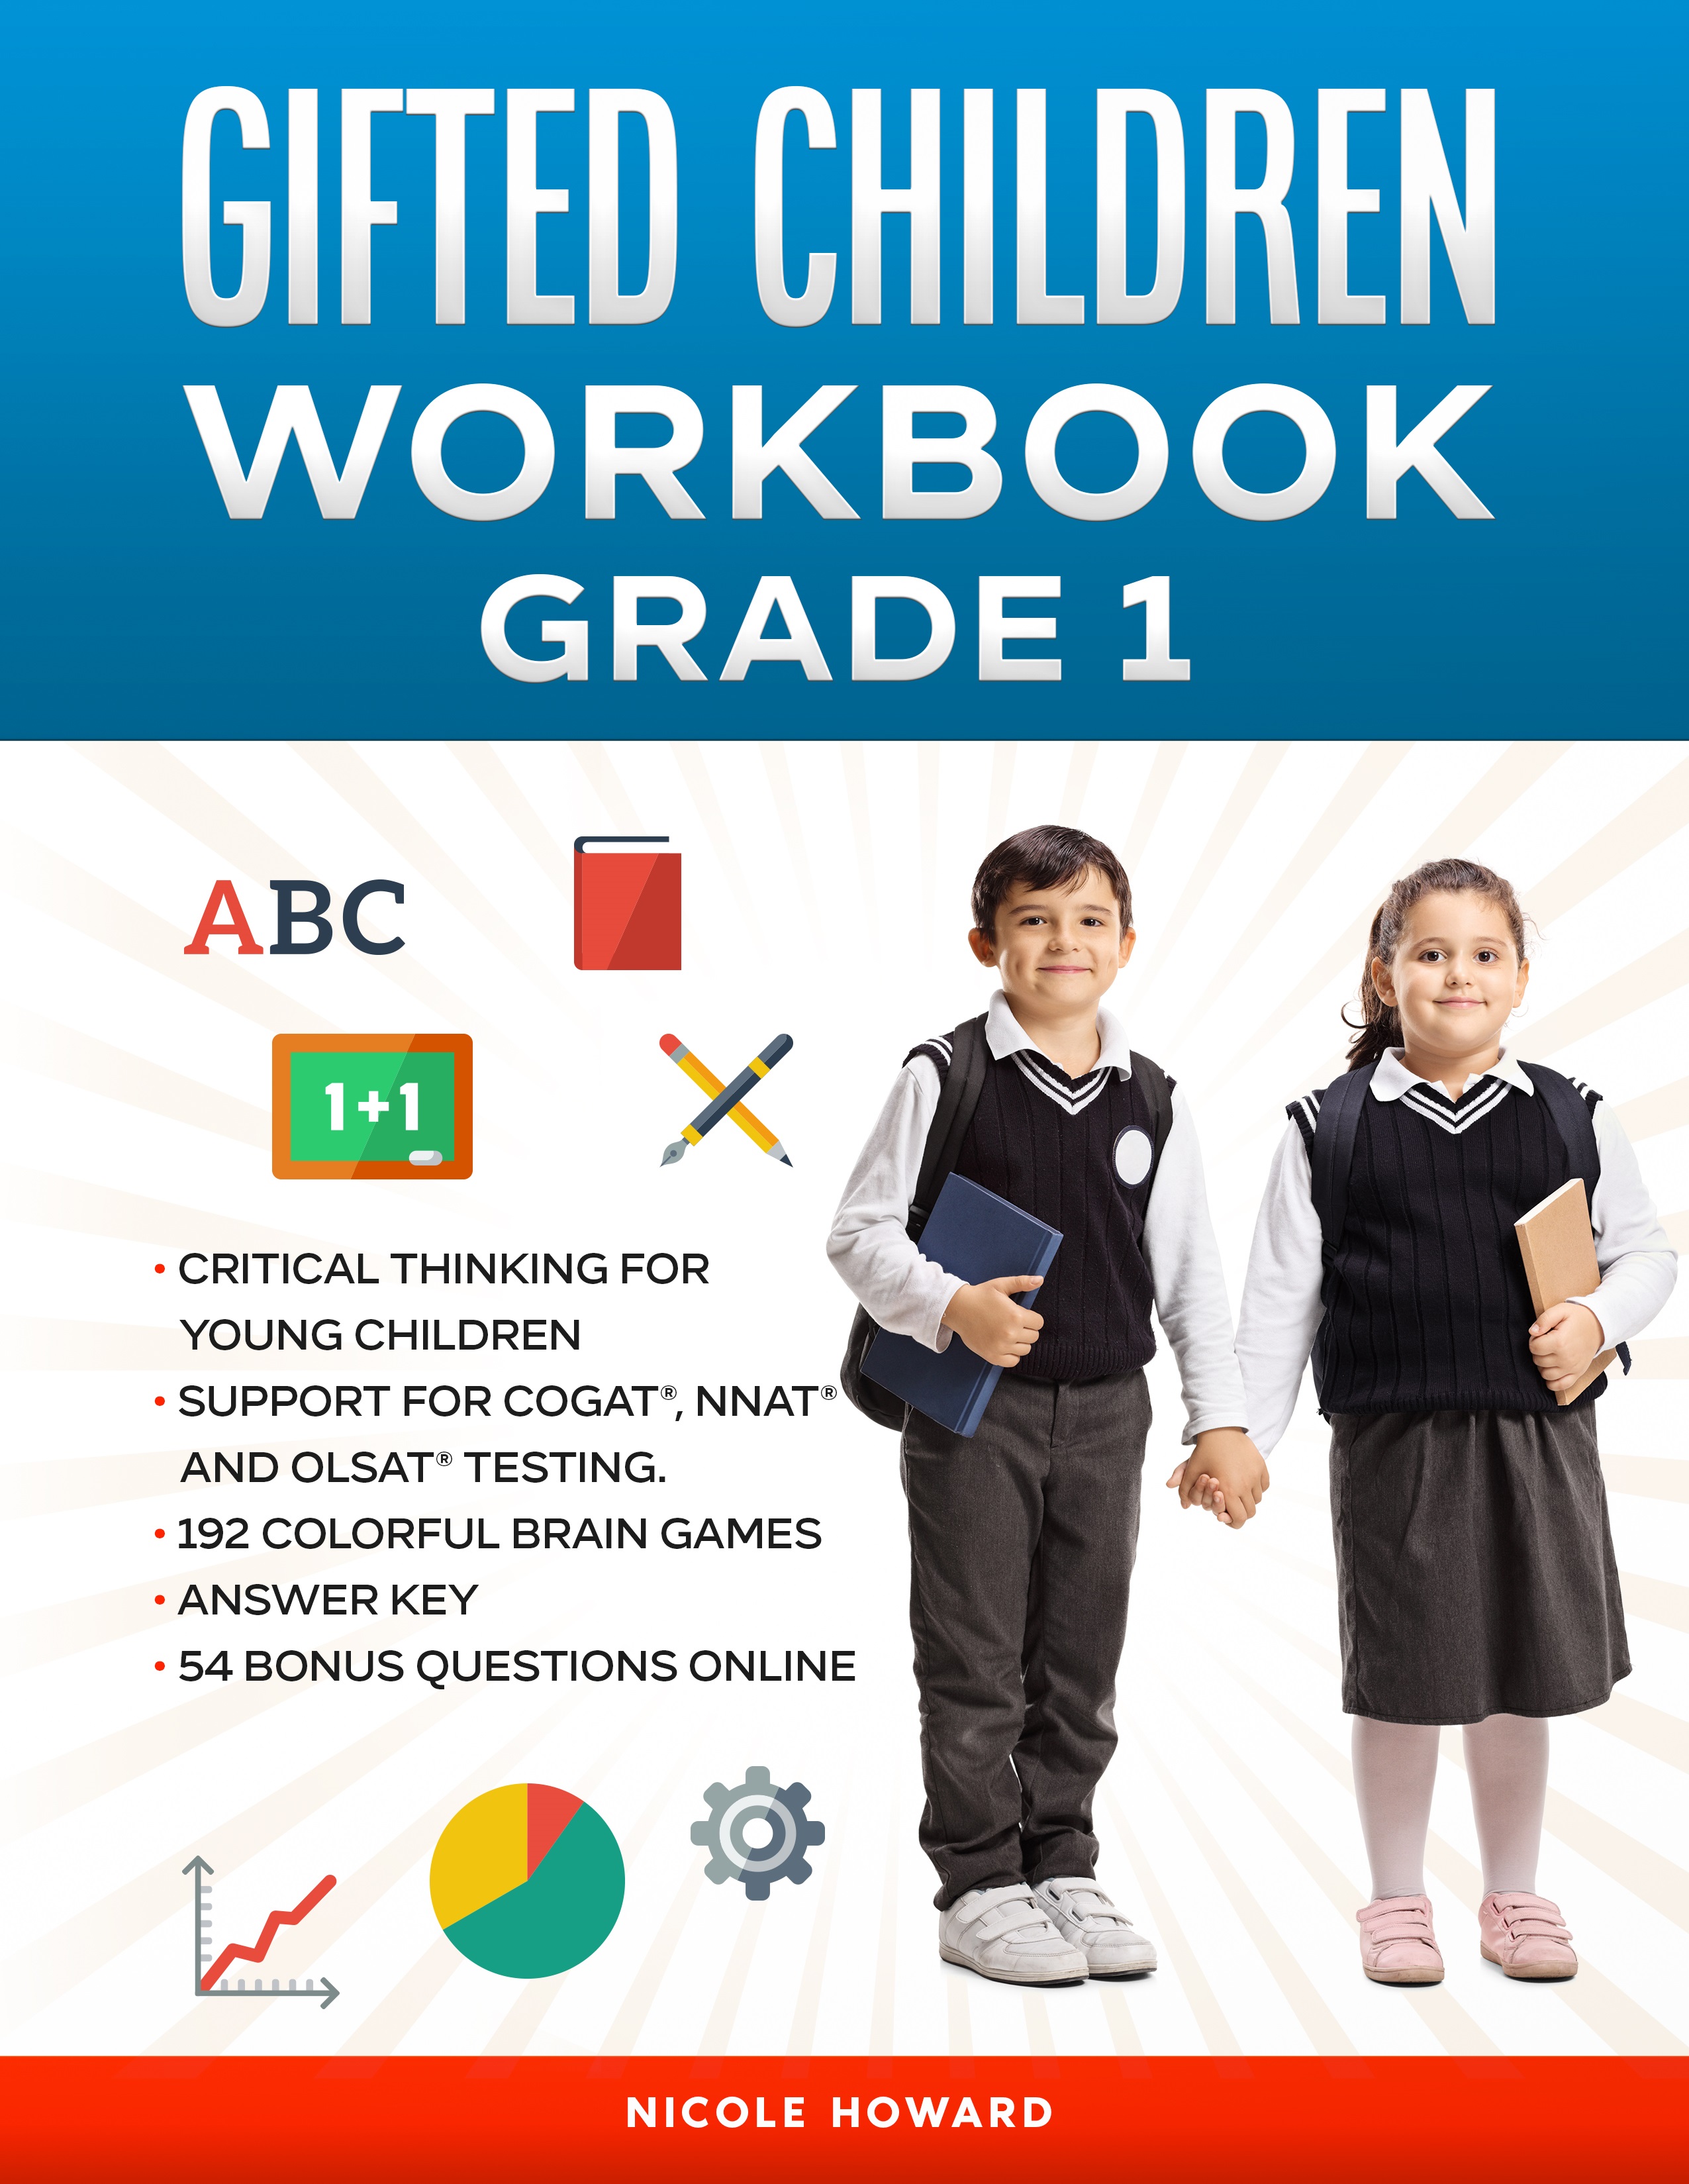 GIFTED AND TALENTED WORKBOOK GRADE 1